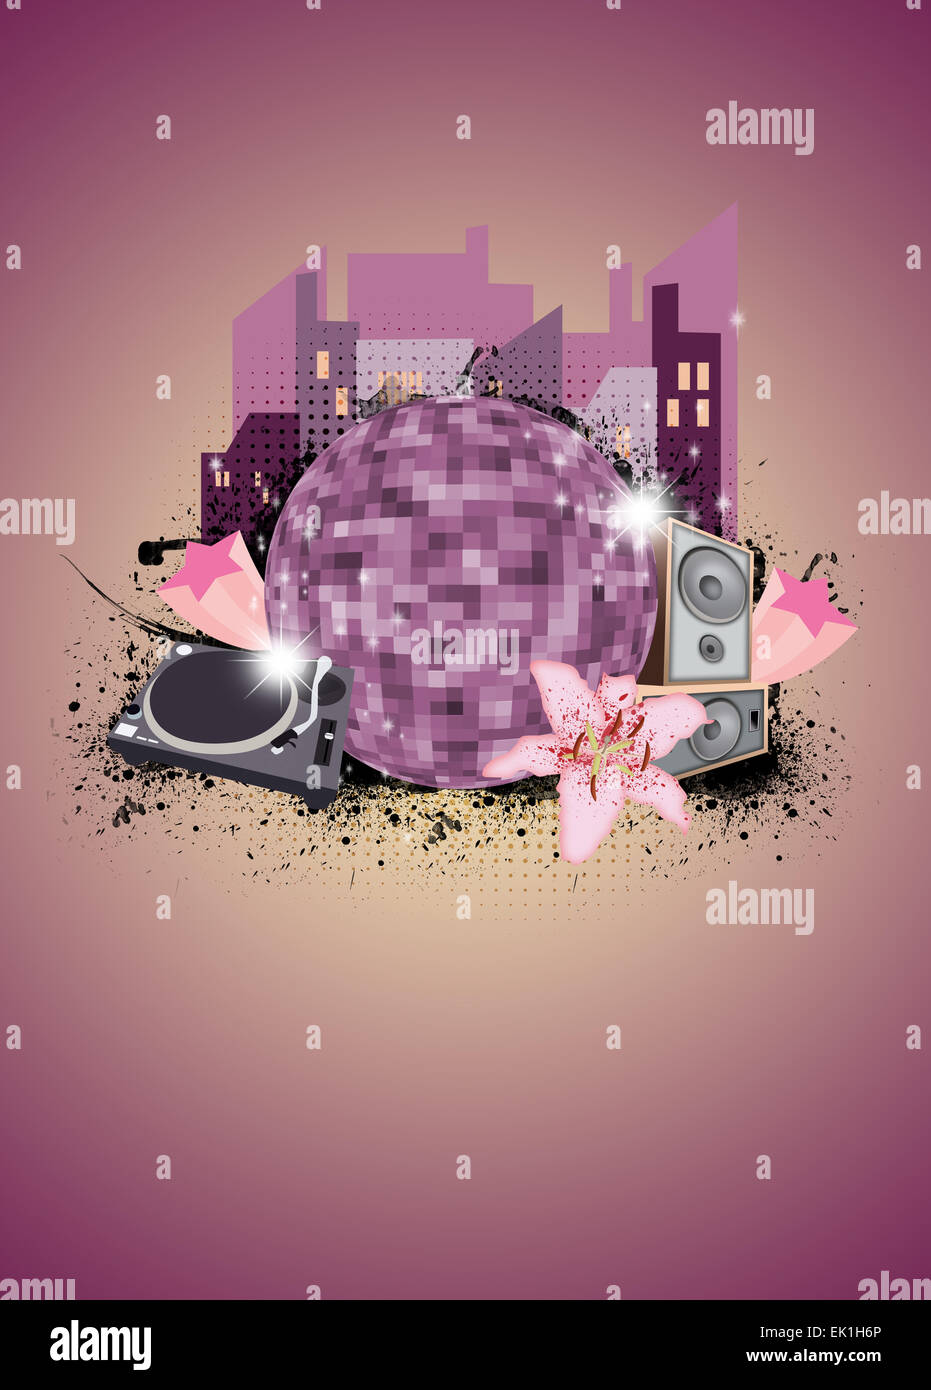 City music party poster or flyer background with space Stock Photo - Alamy